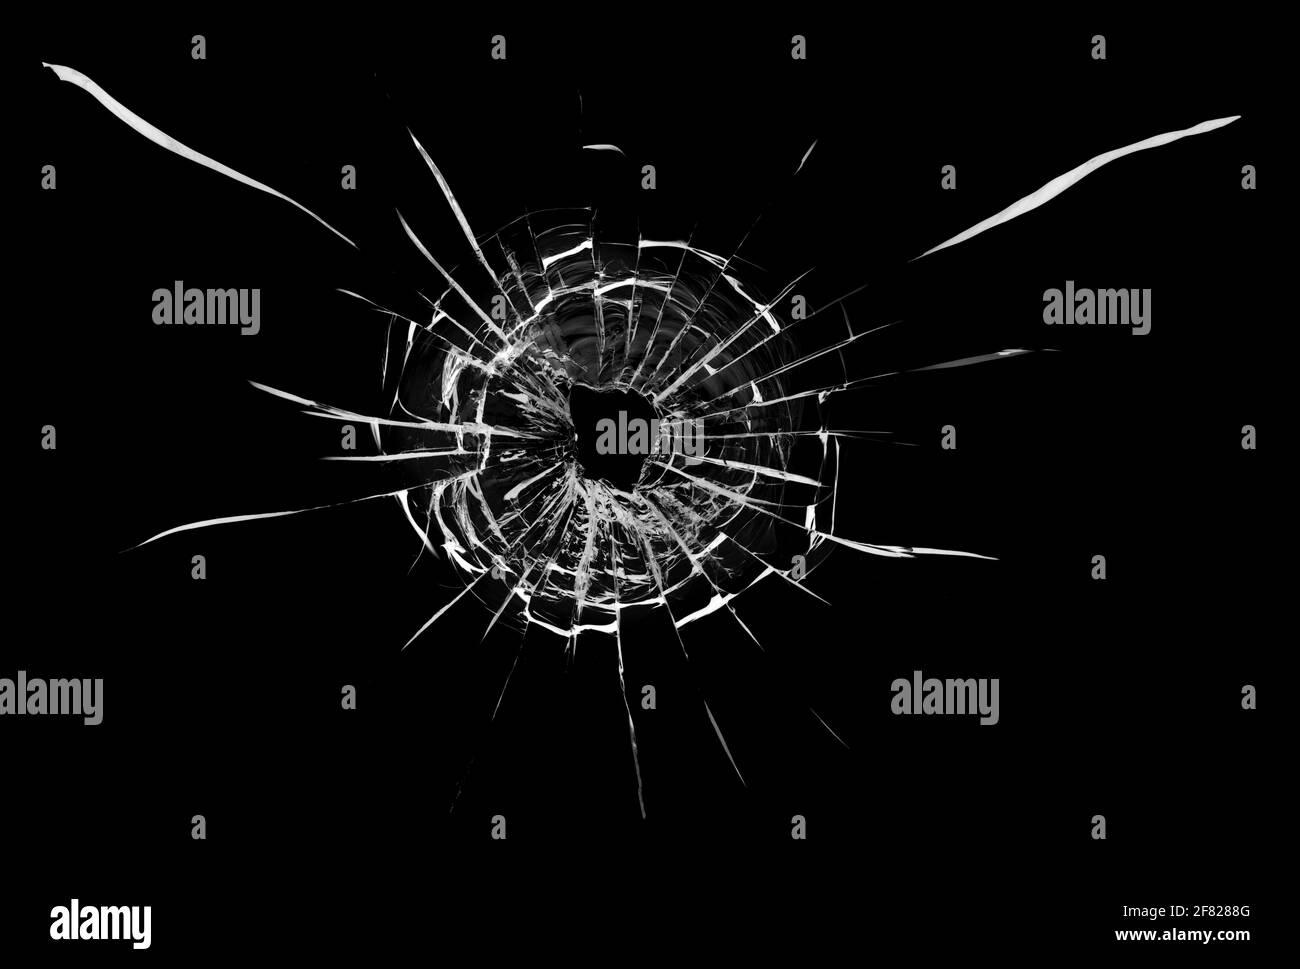 Bullet hole in the glass. Isolated on a black background. Stock Photo